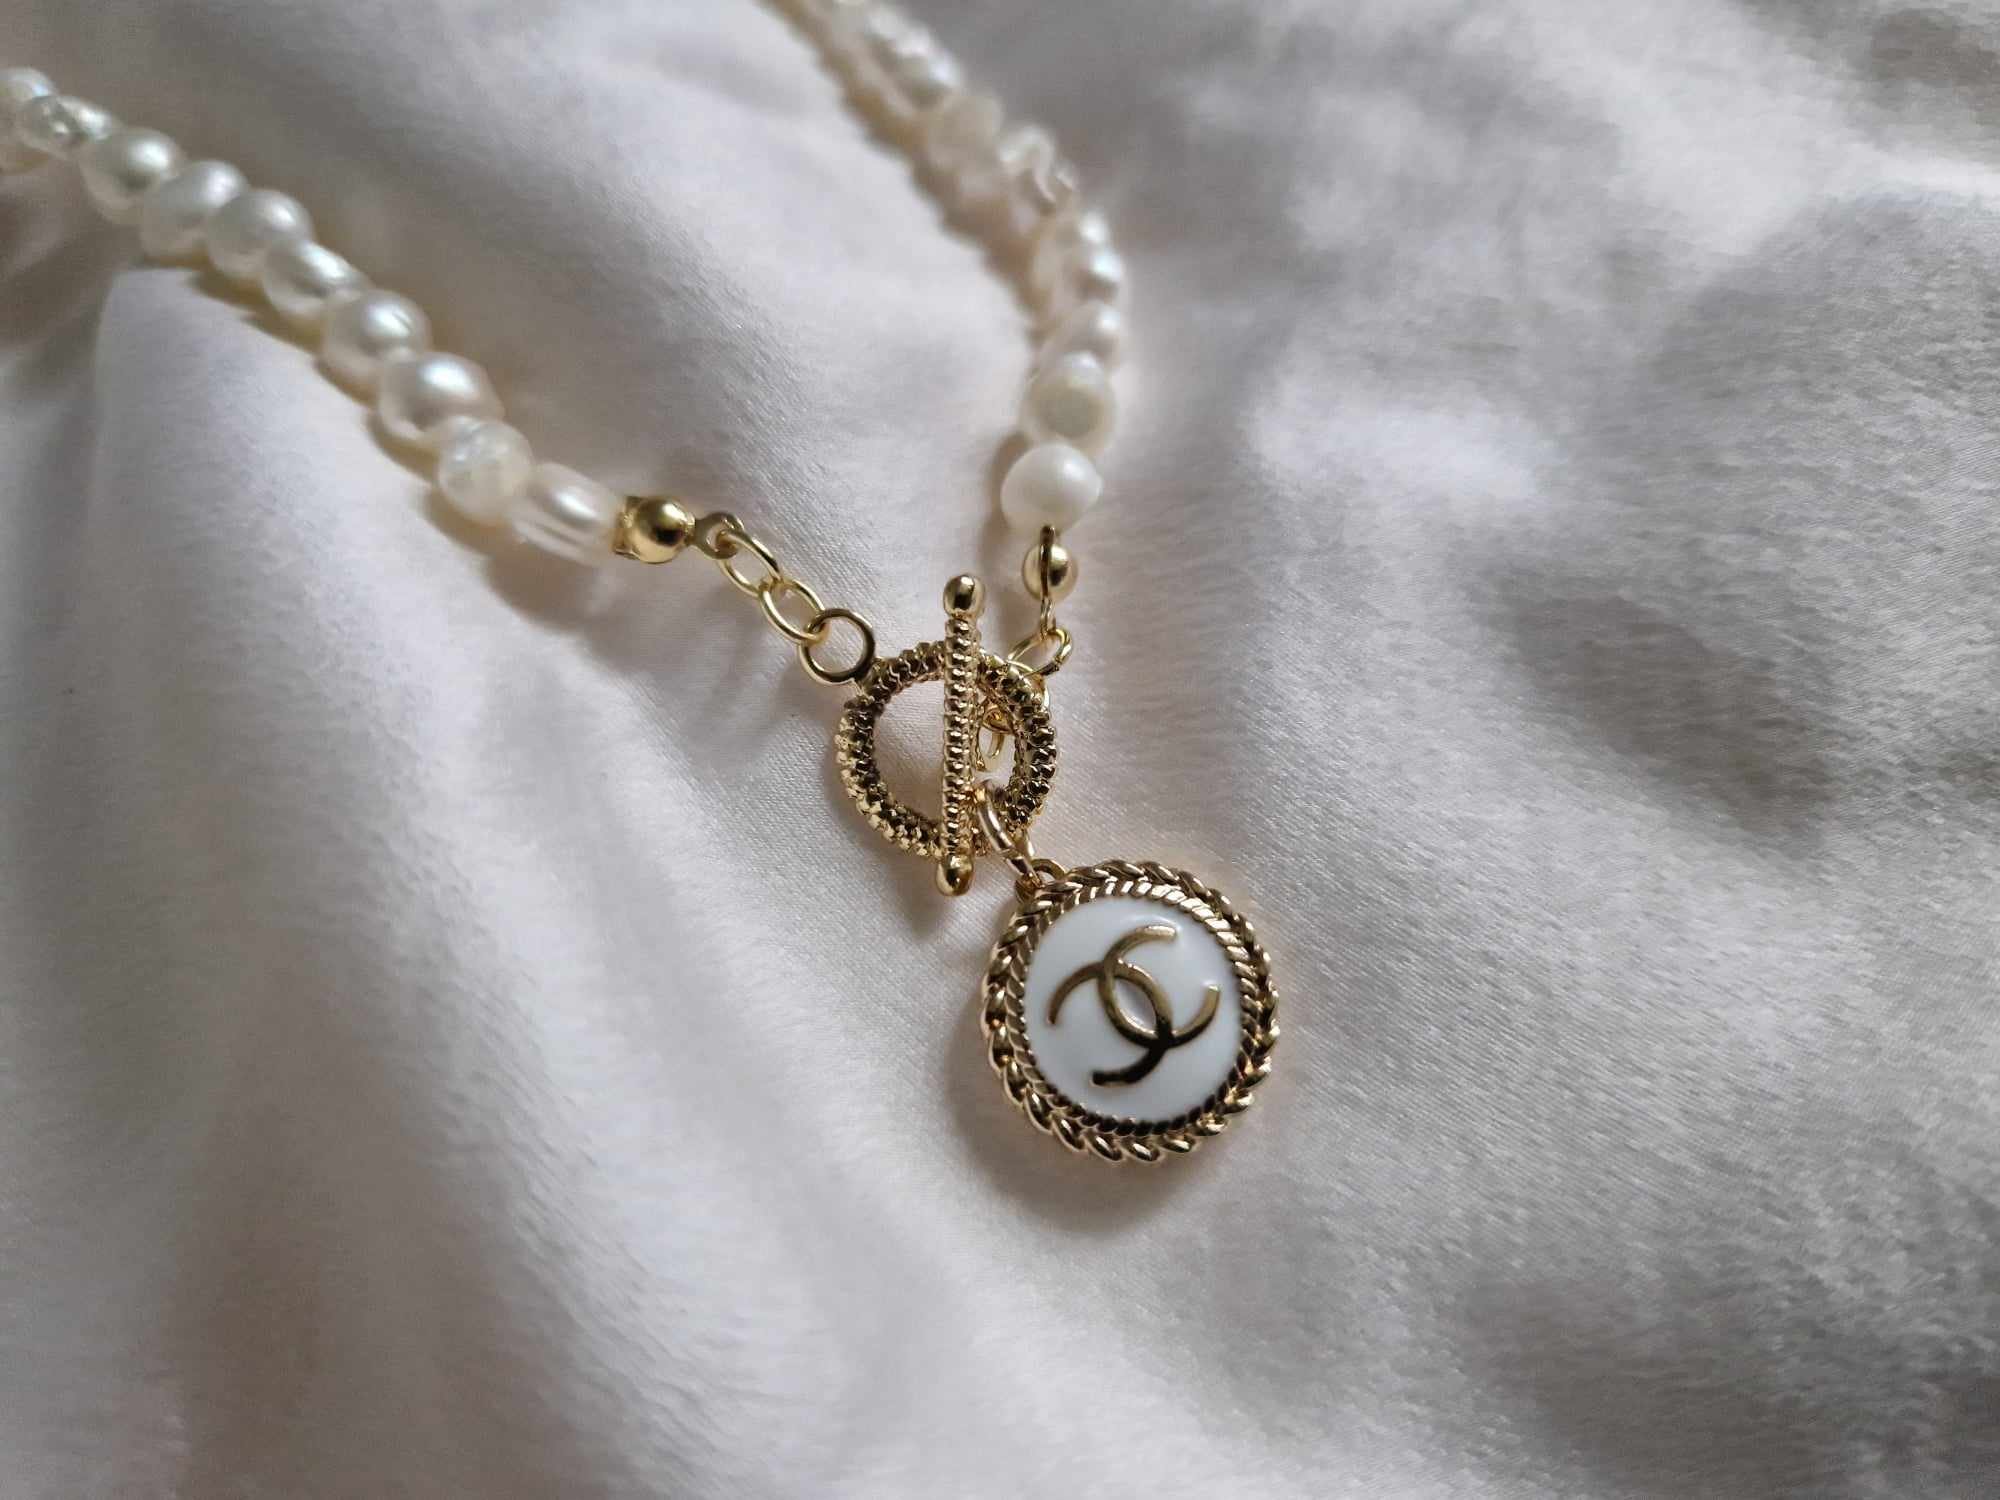 NAOMI NECKLACE — Made By Adele